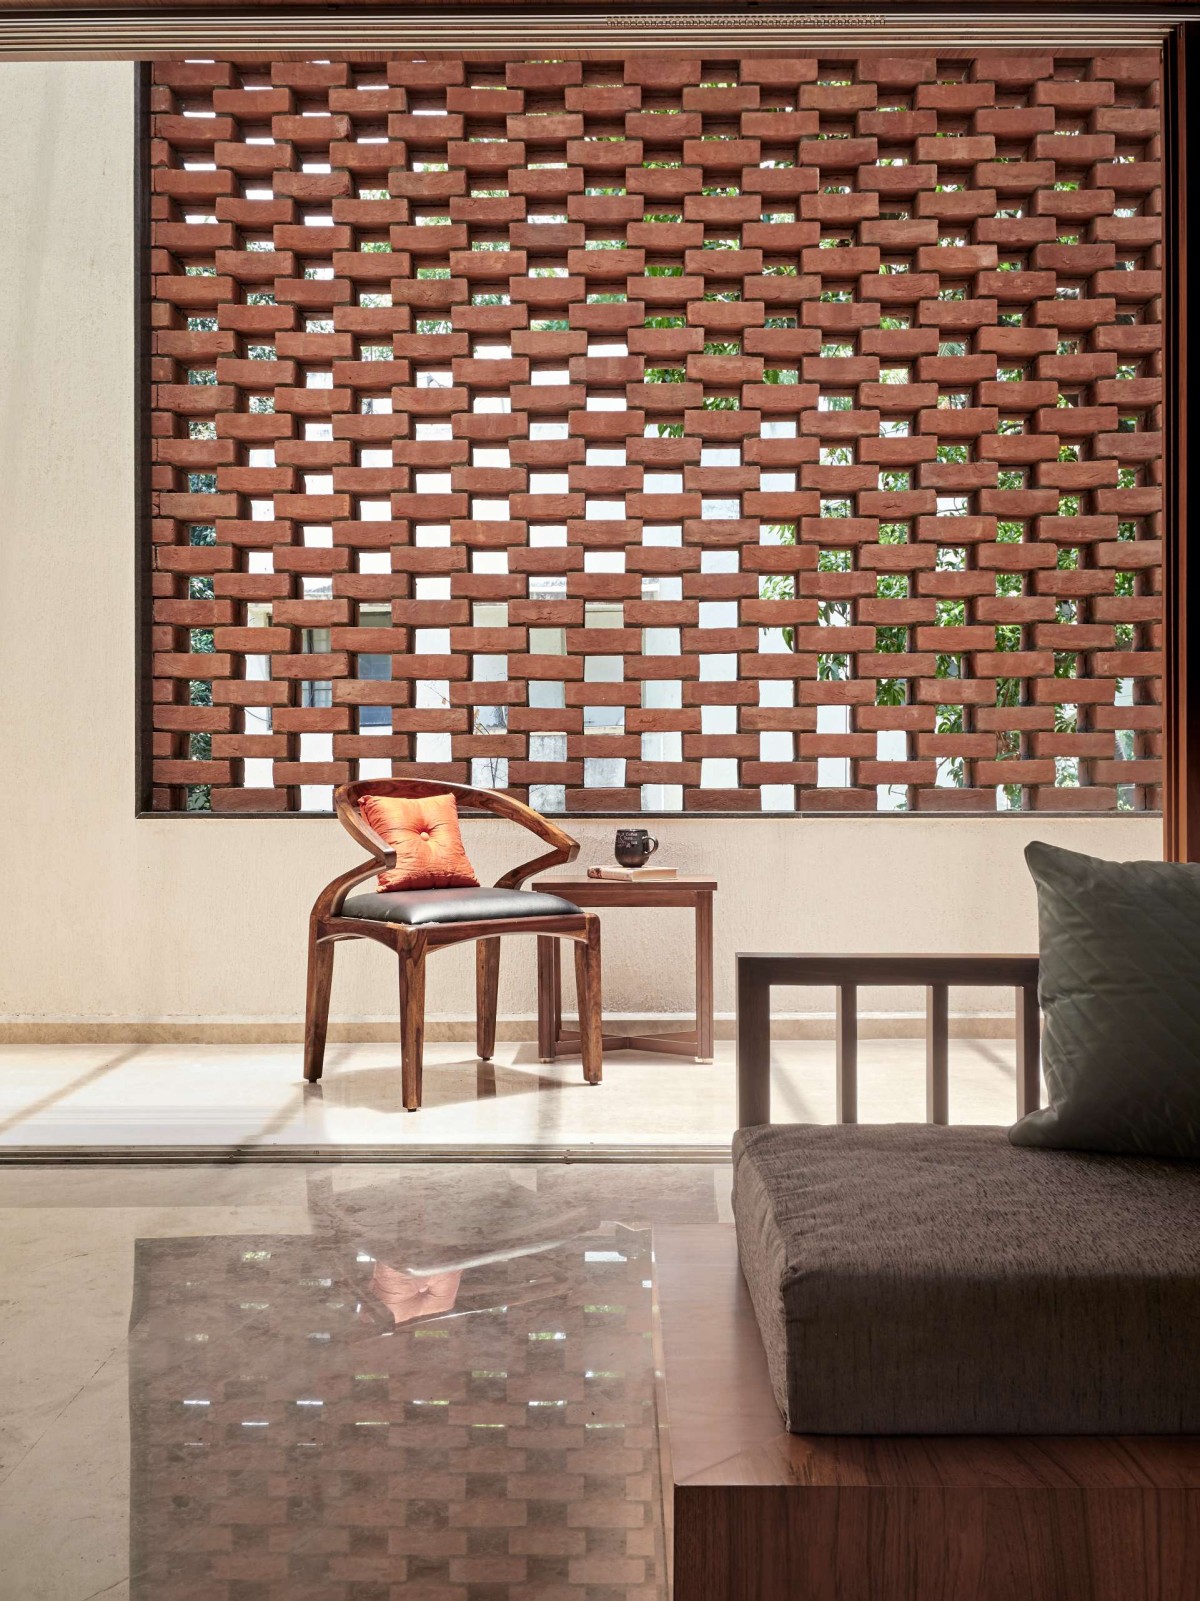 Multi-purpose room - Brick perforated wall of The Brick Abode by Alok Kothari Architects